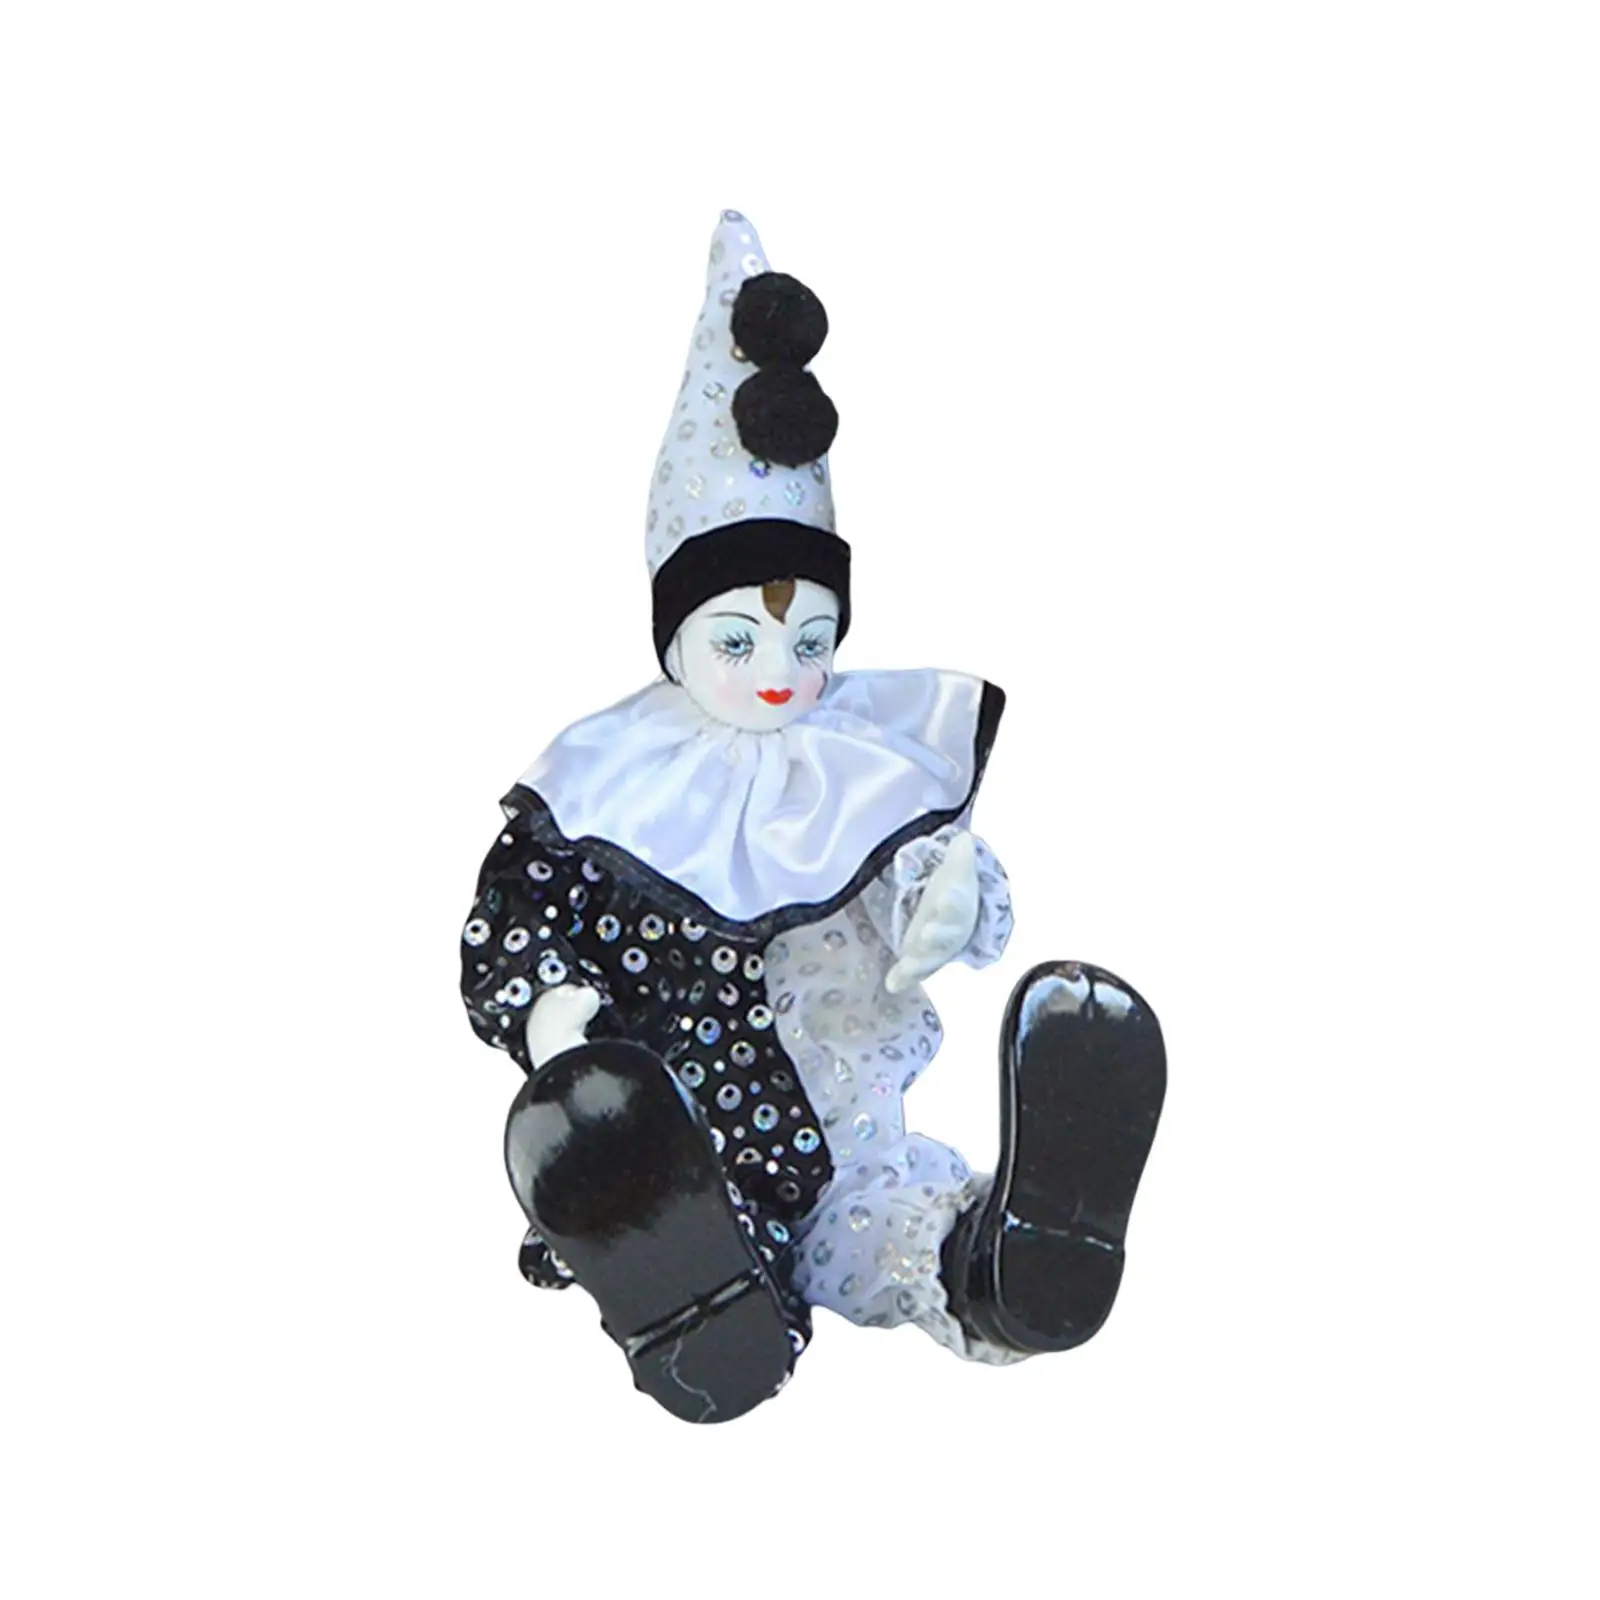 

Decorative Porcelain Clown Model Standing Home Display Funny 15inch Clown Dolls for Gift Festival Birthday Halloween Collection